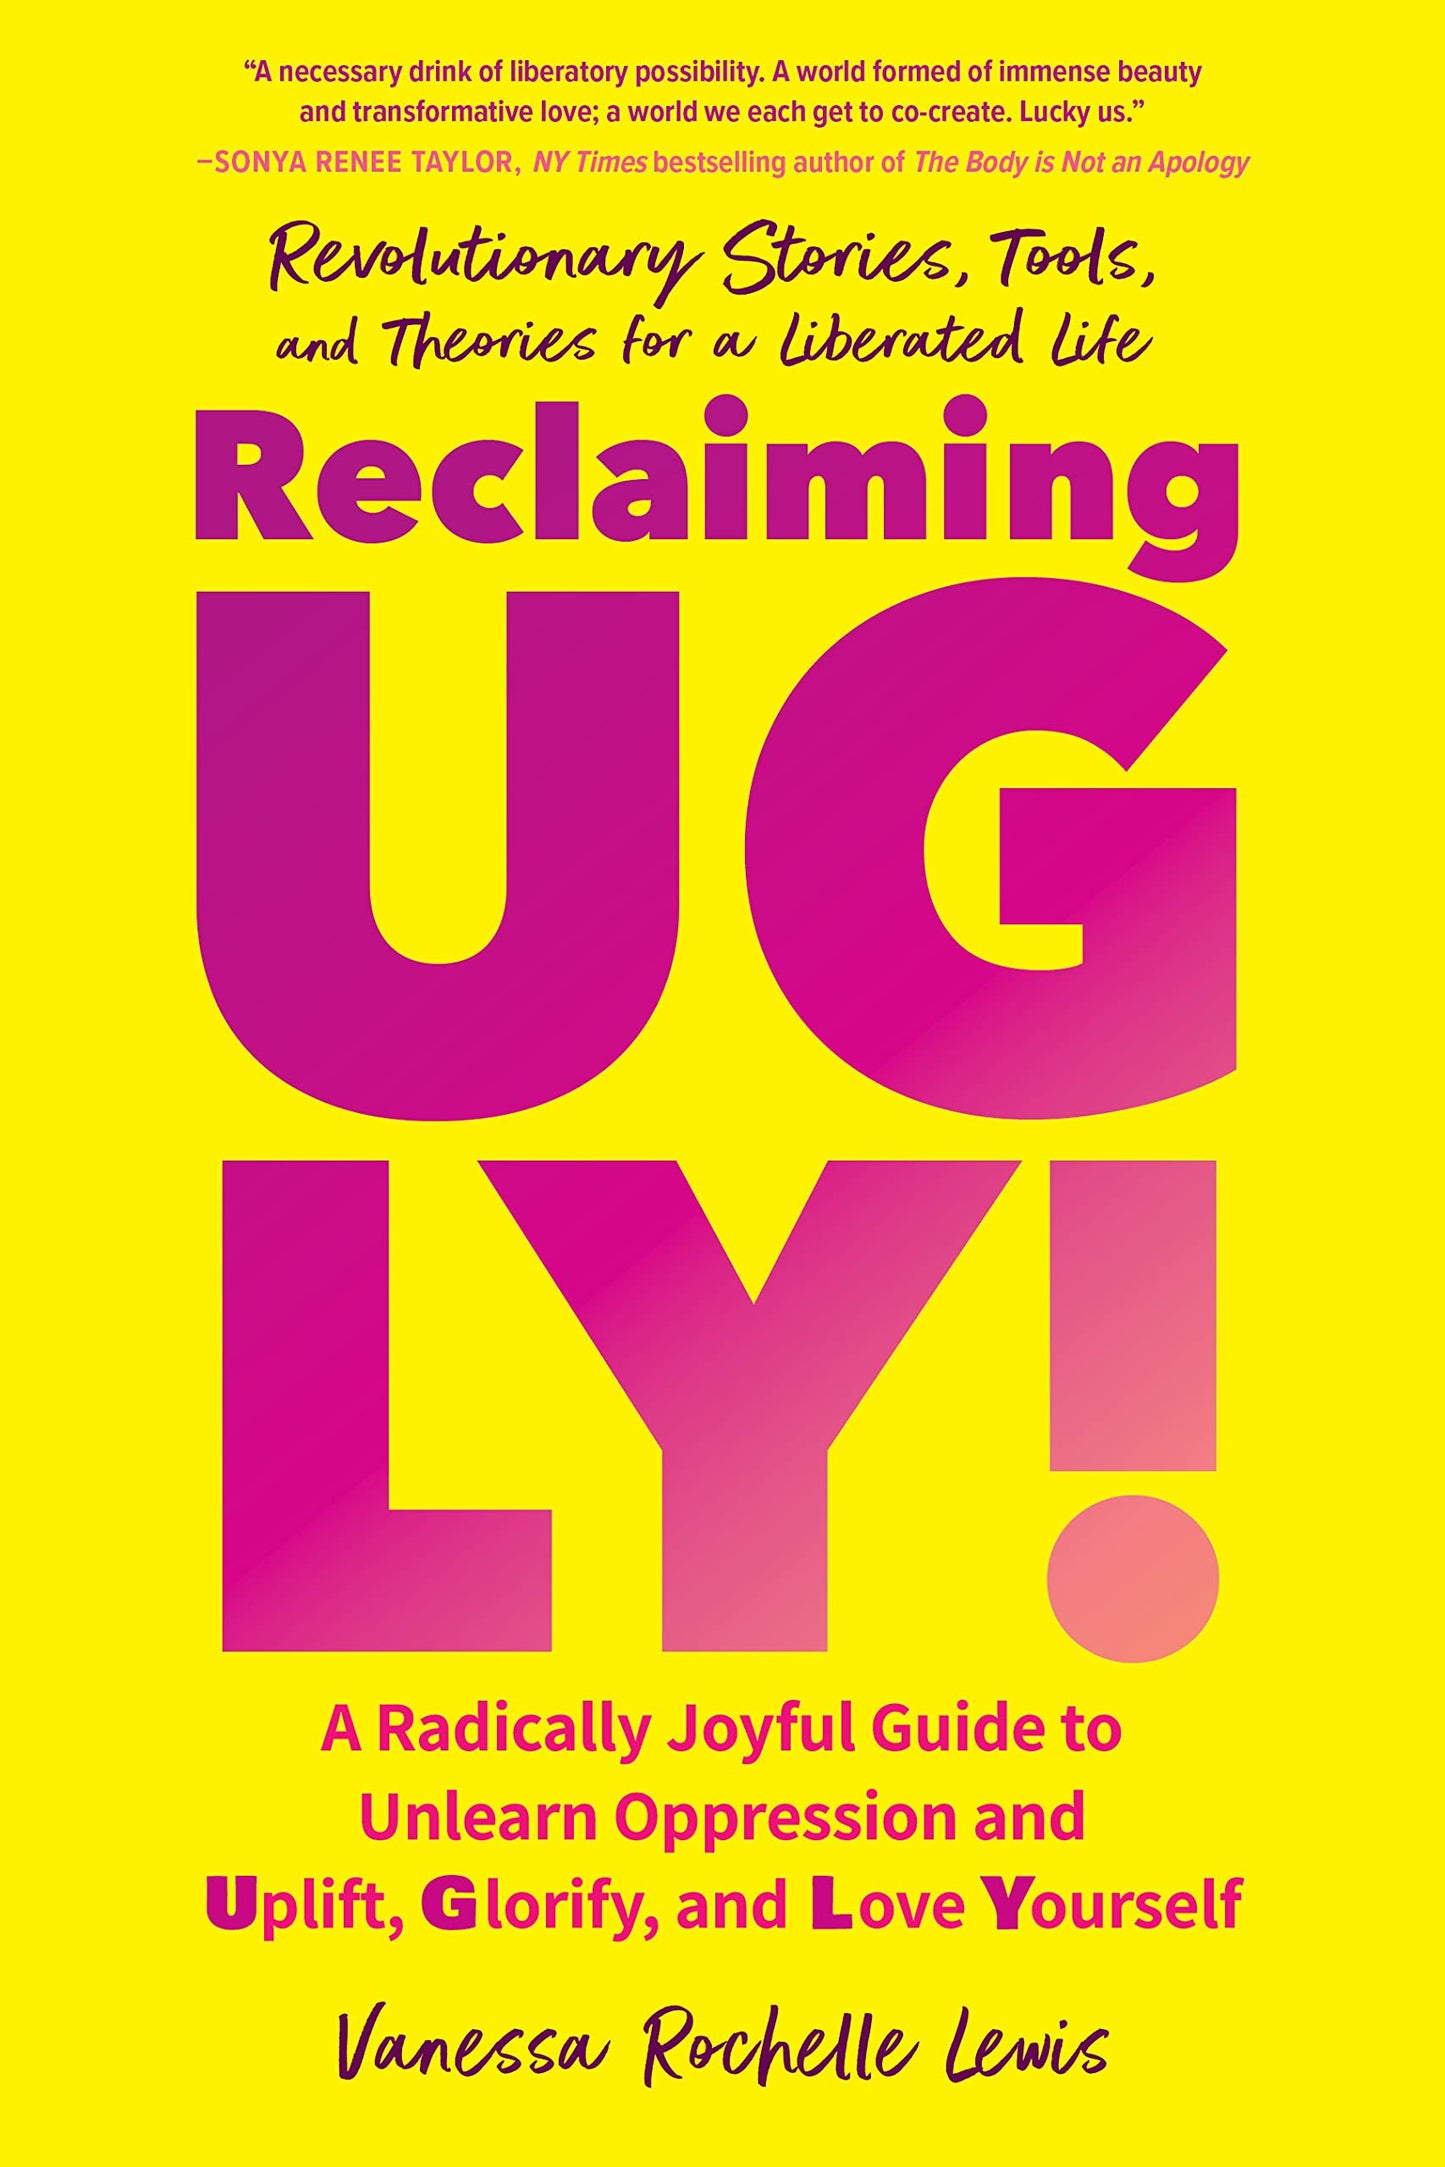 Reclaiming Ugly! // A Radically Joyful Guide to Unlearn Oppression and Uplift, Glorify, and Love Yourself